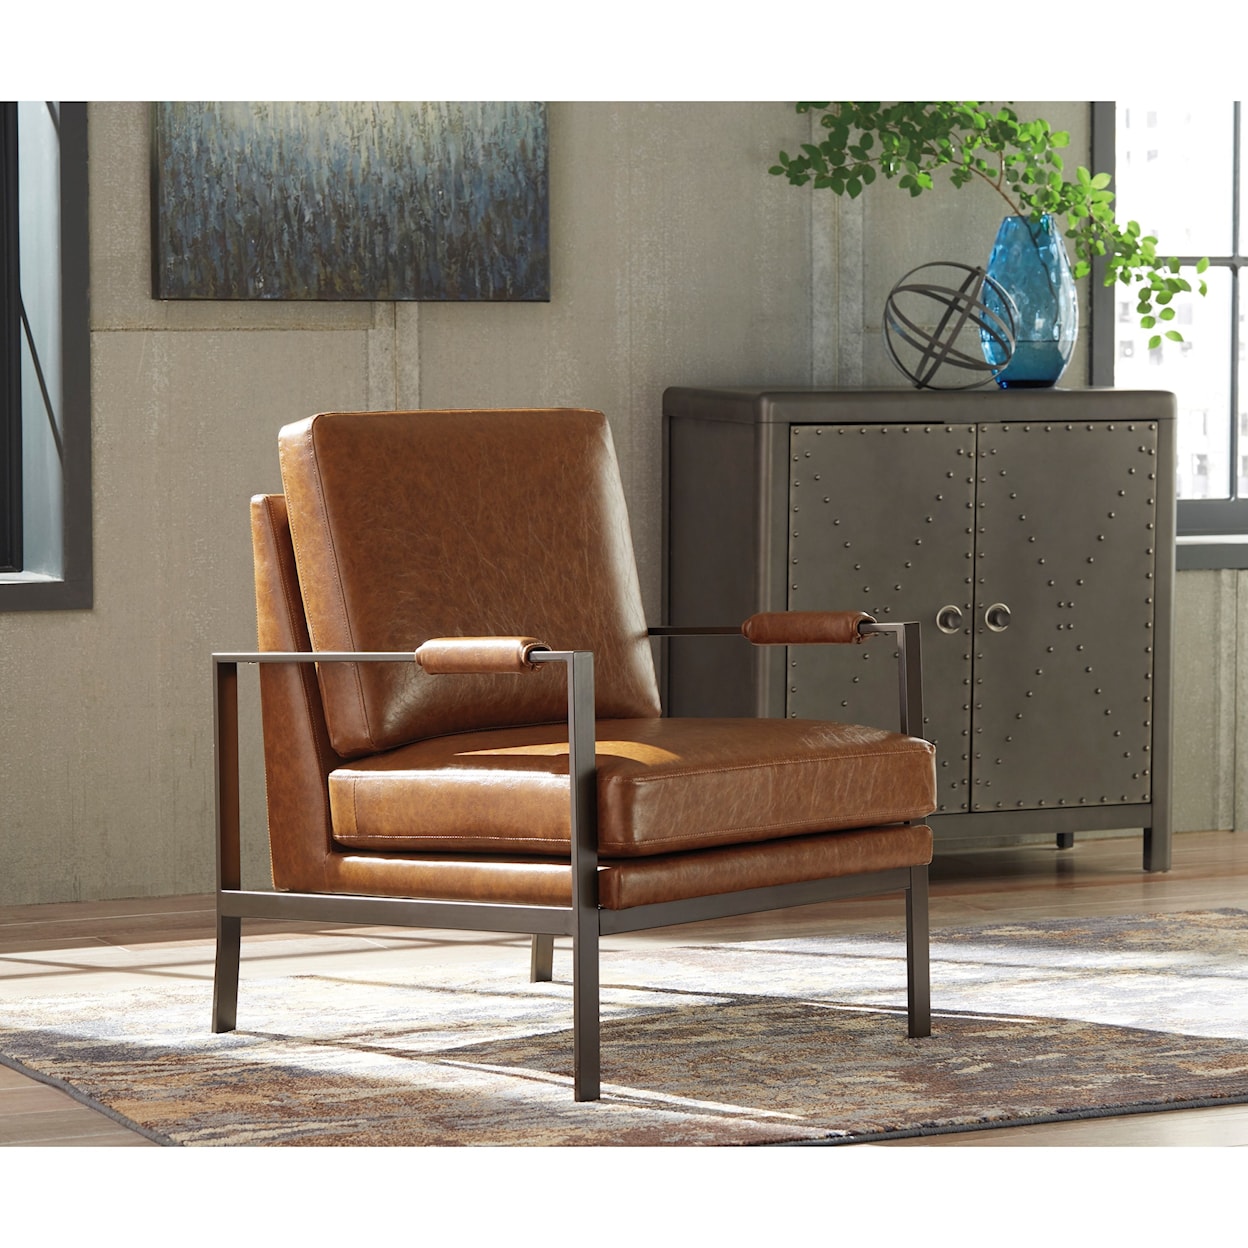 Signature Design by Ashley Peacemaker Accent Chair